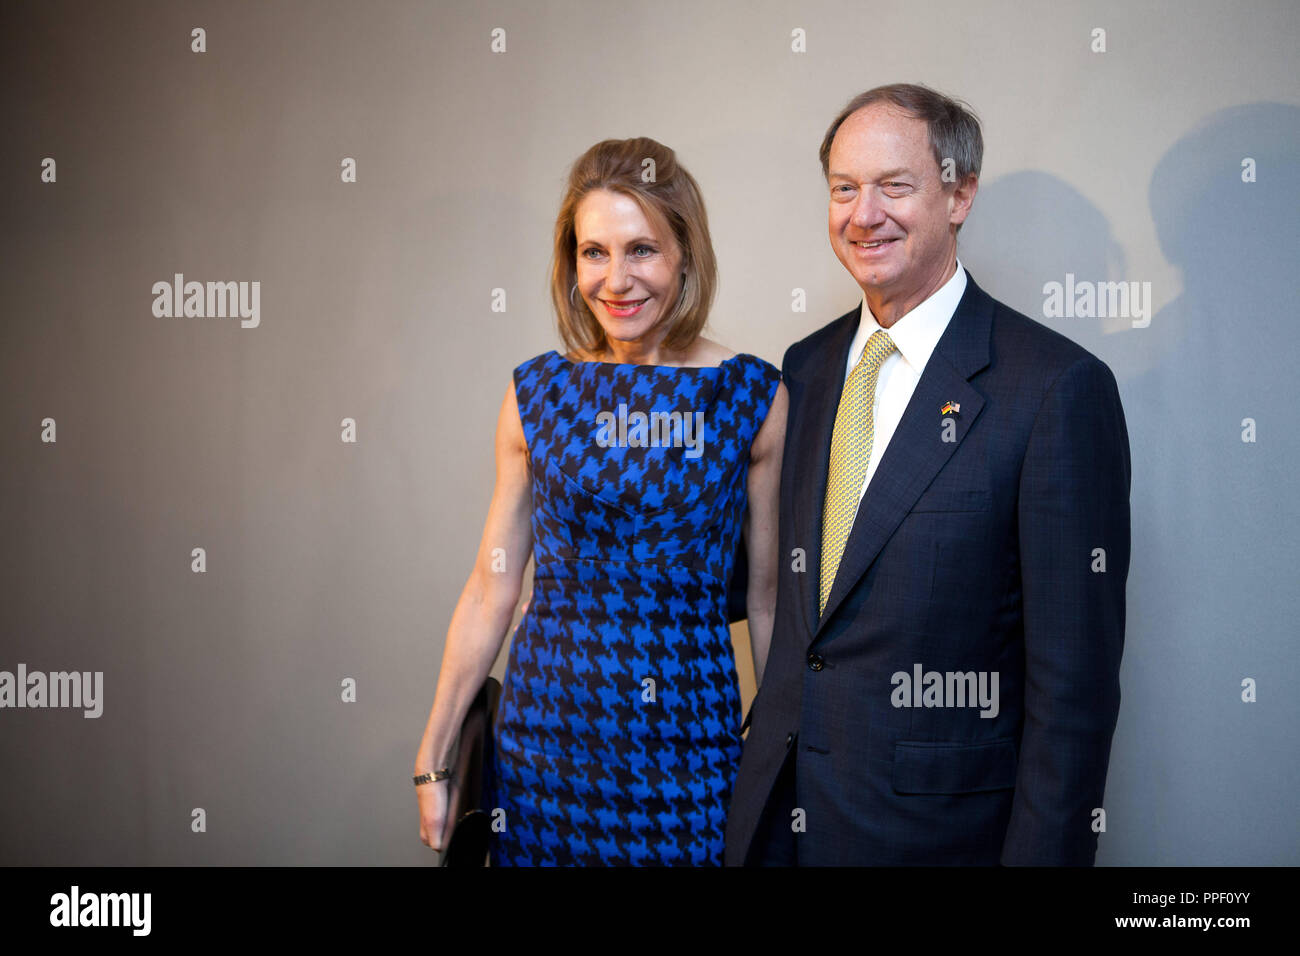 John Emerson, US ambassador in Germany, with his wife Kimberly Marteau ...